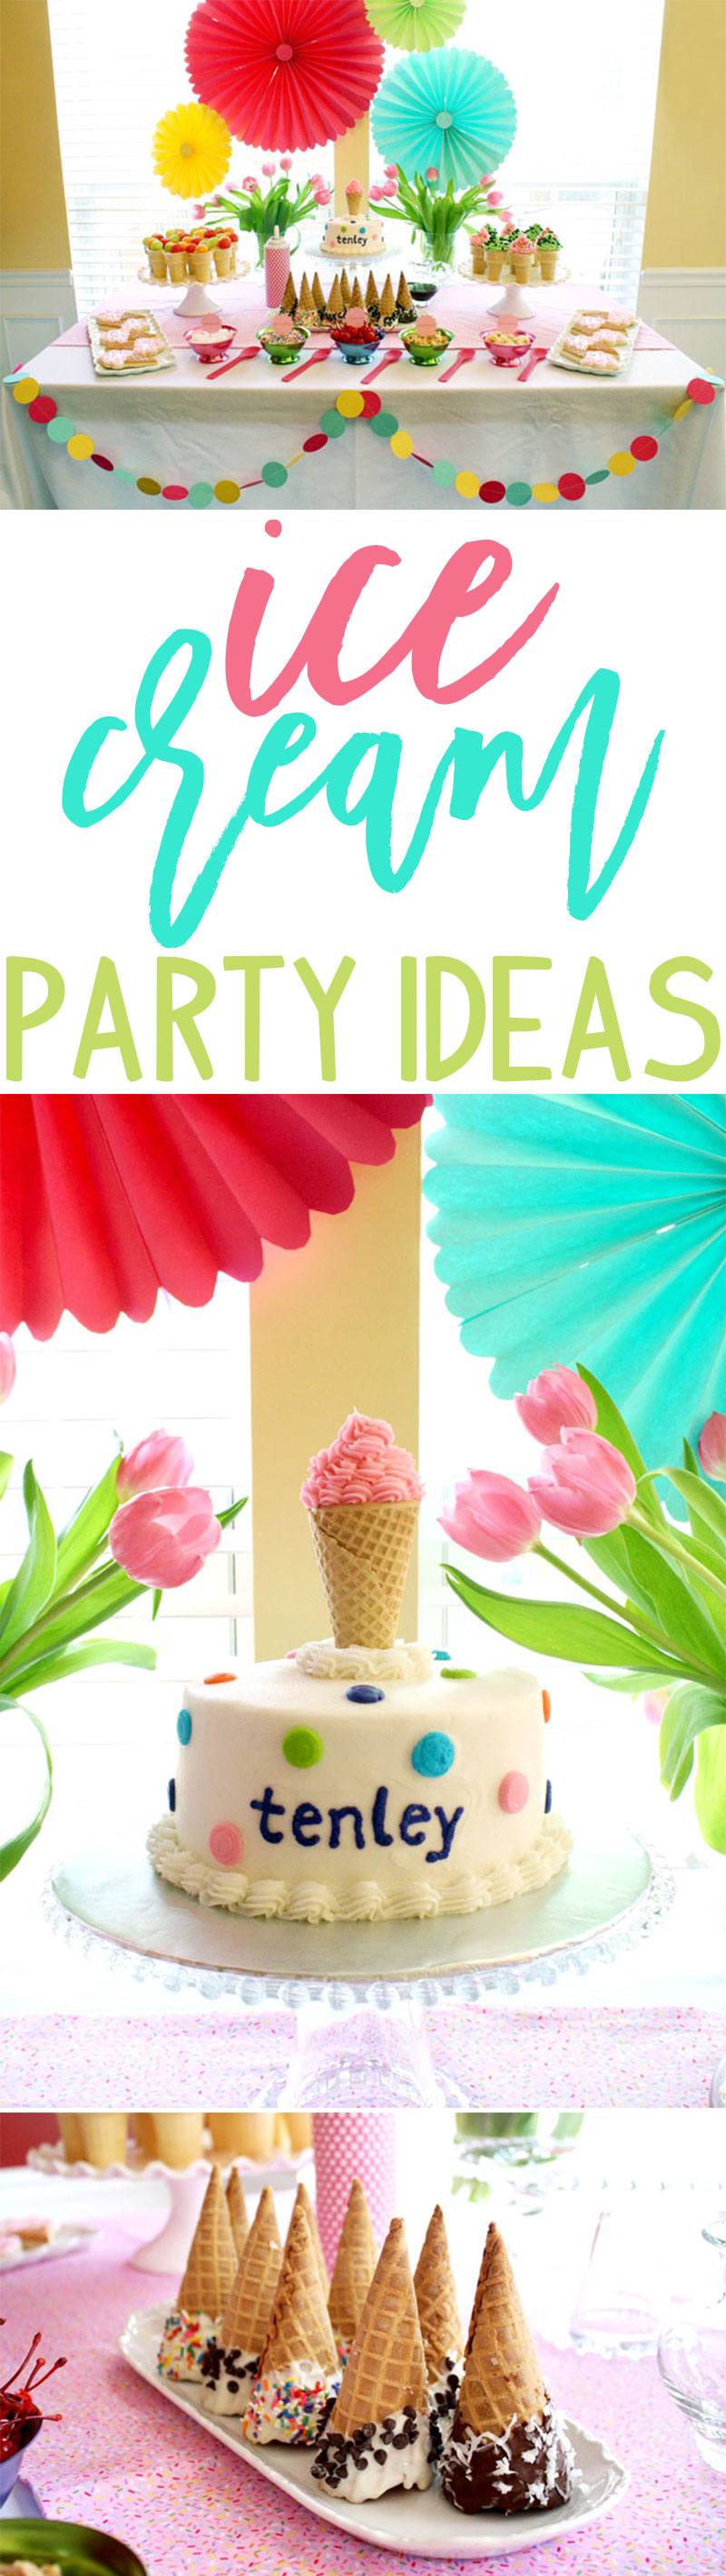 Ice Cream Party Ideas on Love The Day